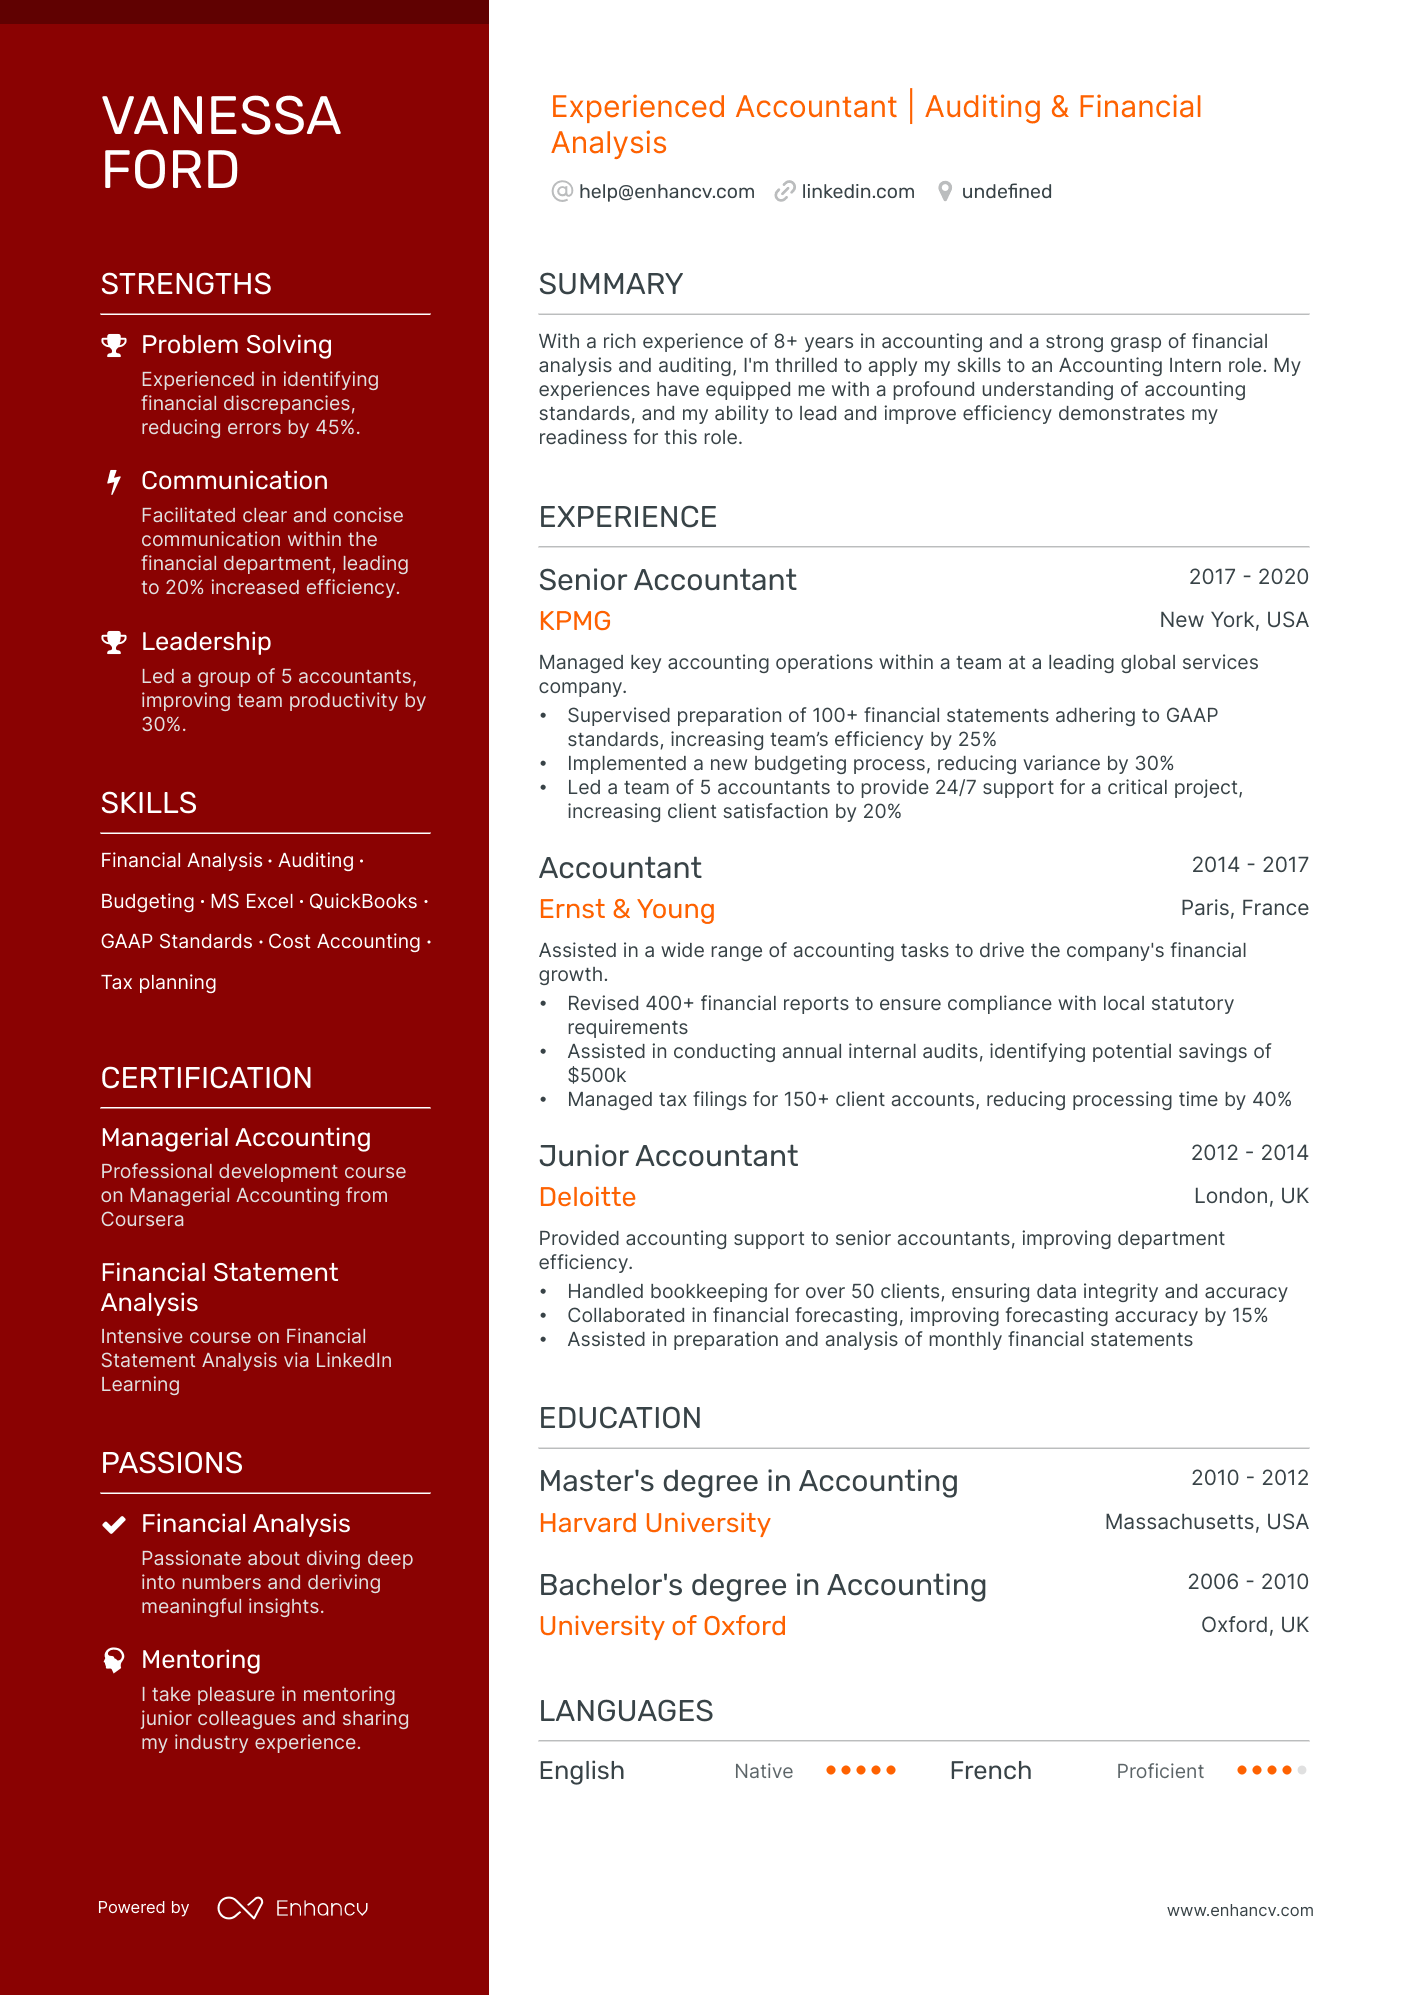 personal profile in resume for accountant